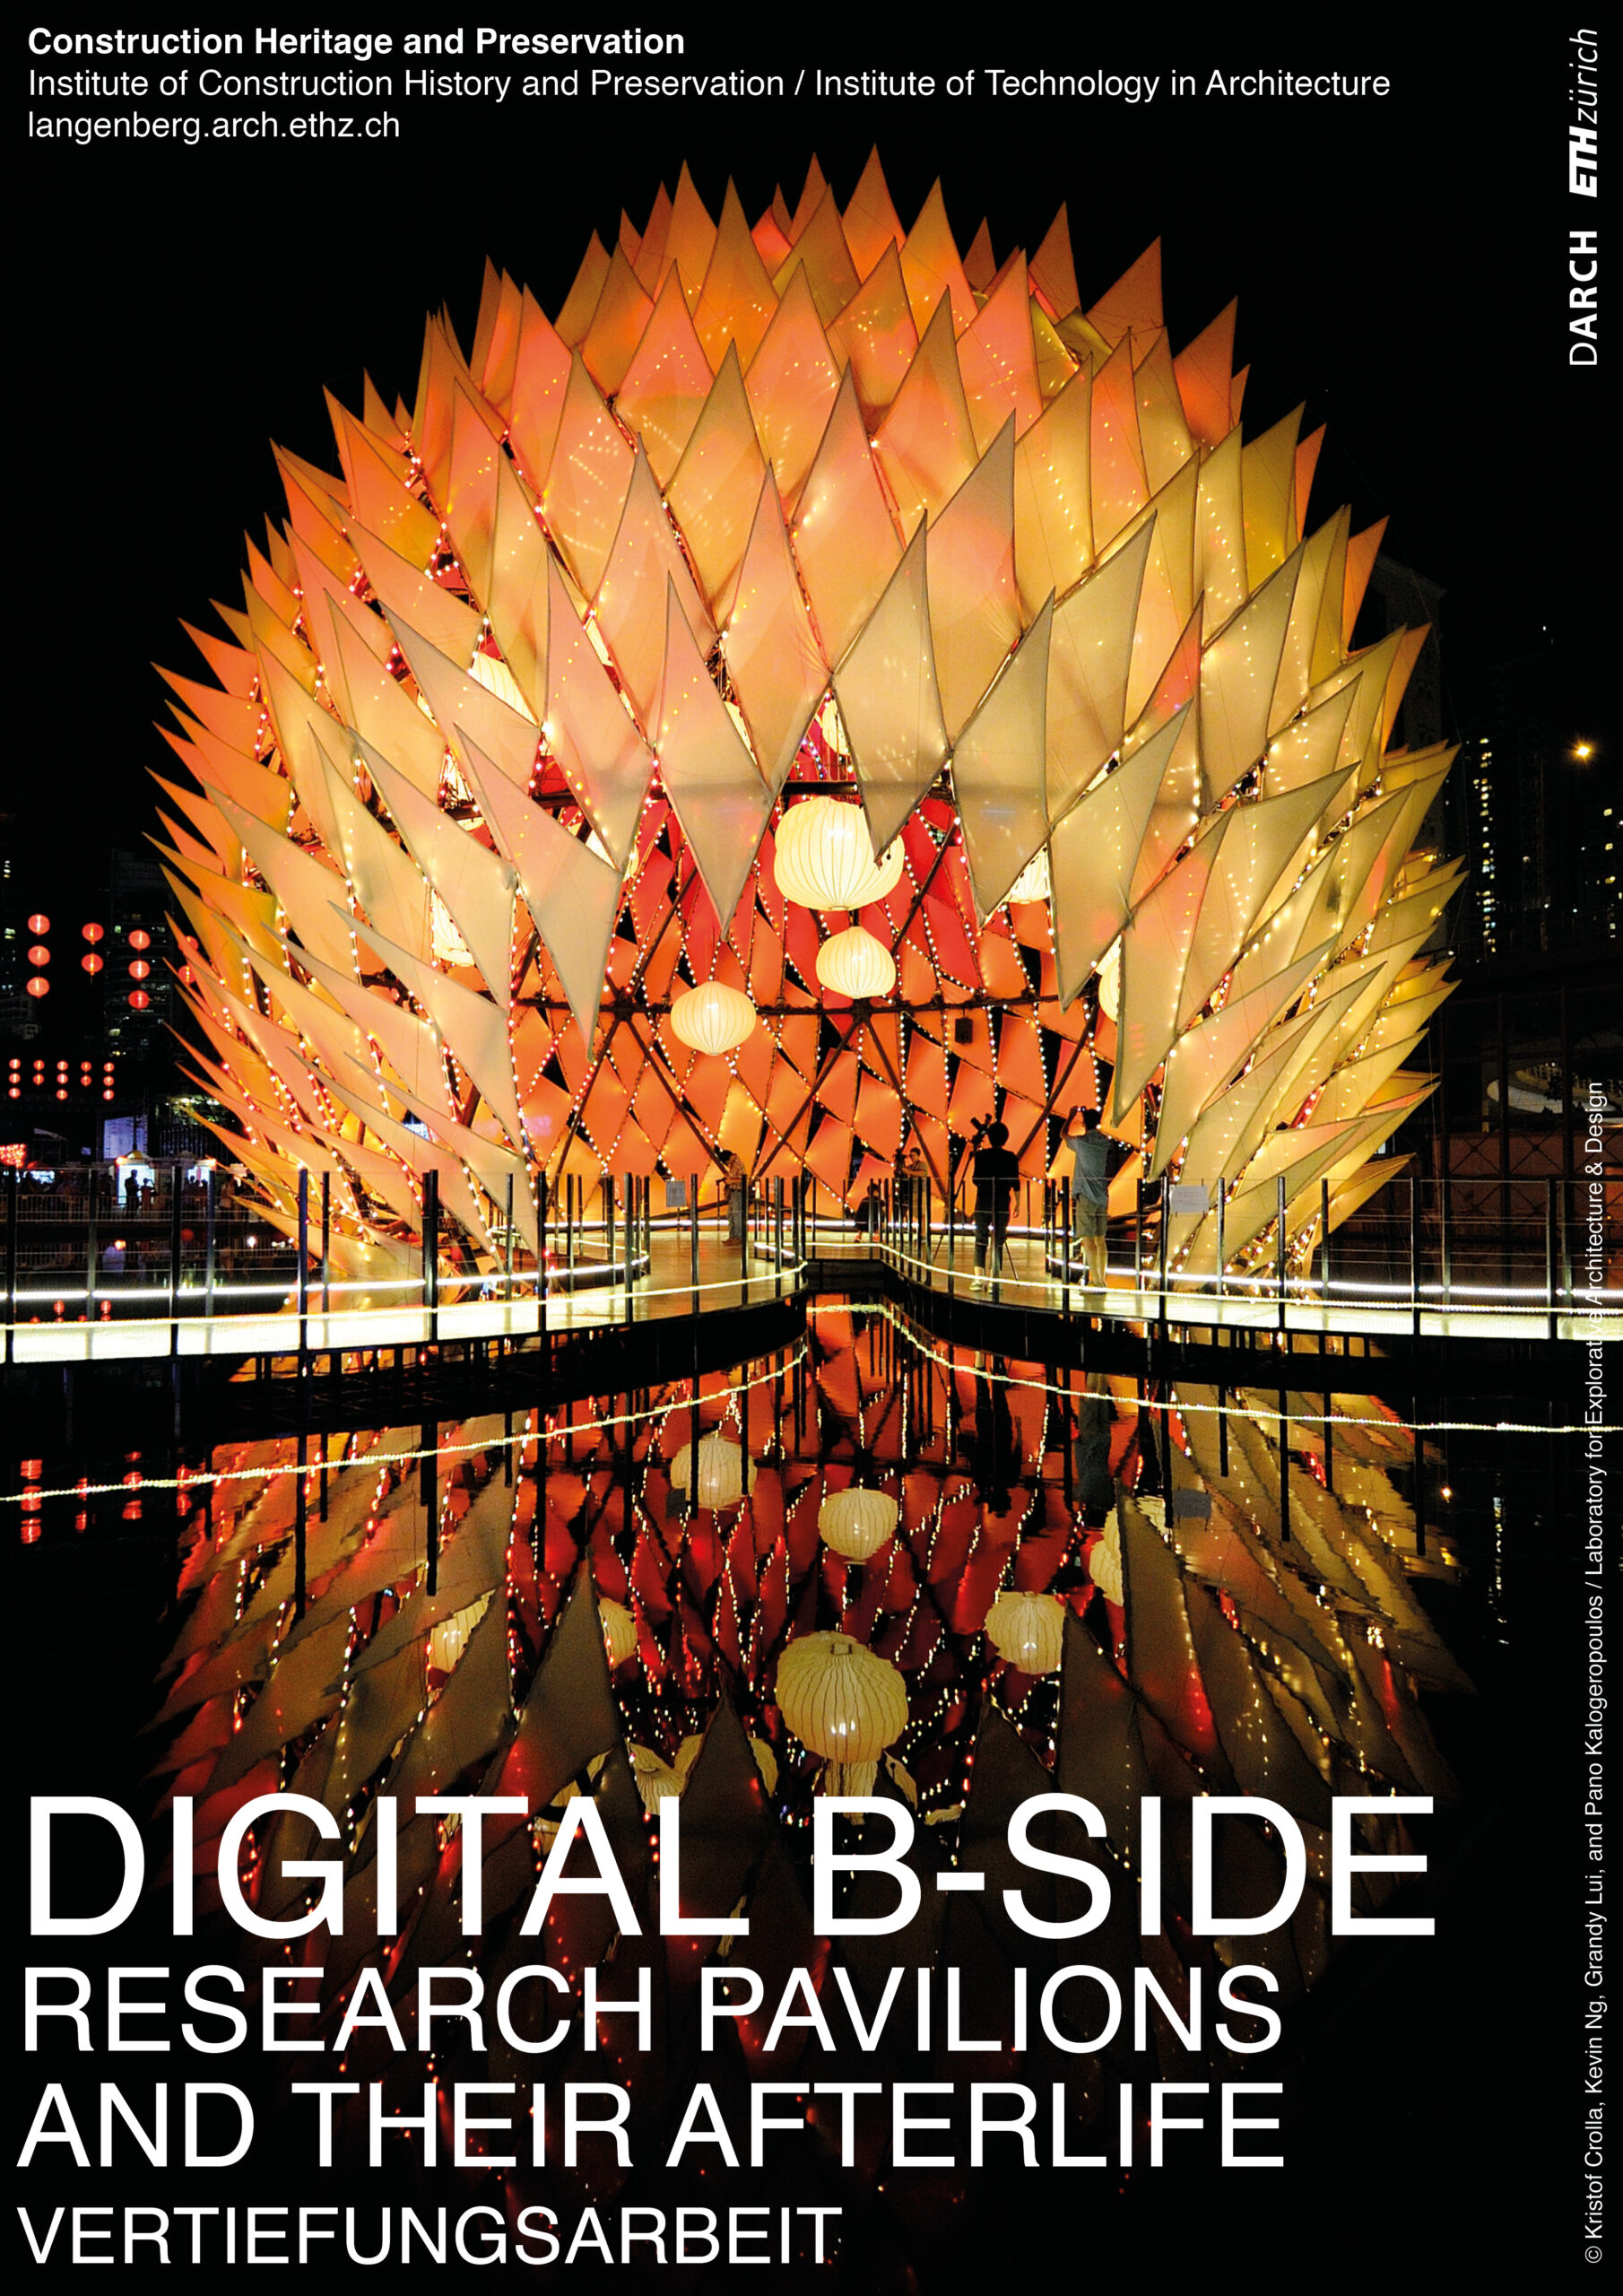 Digital B-Side: A pavilion built as part of a research project in Hong Kong.